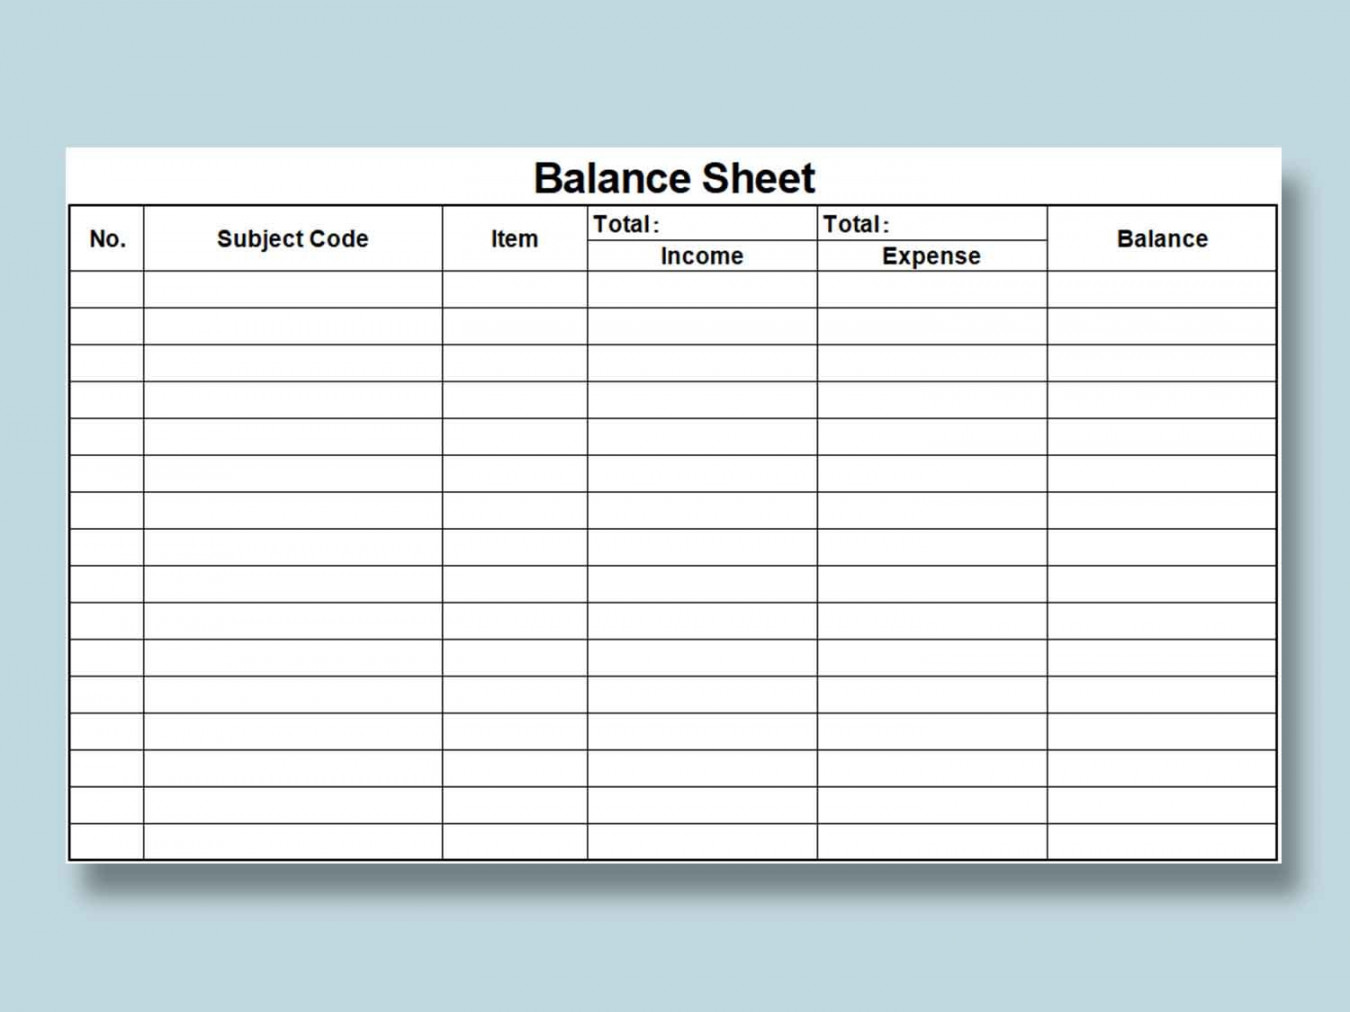 EXCEL of Simple Balance Sheet